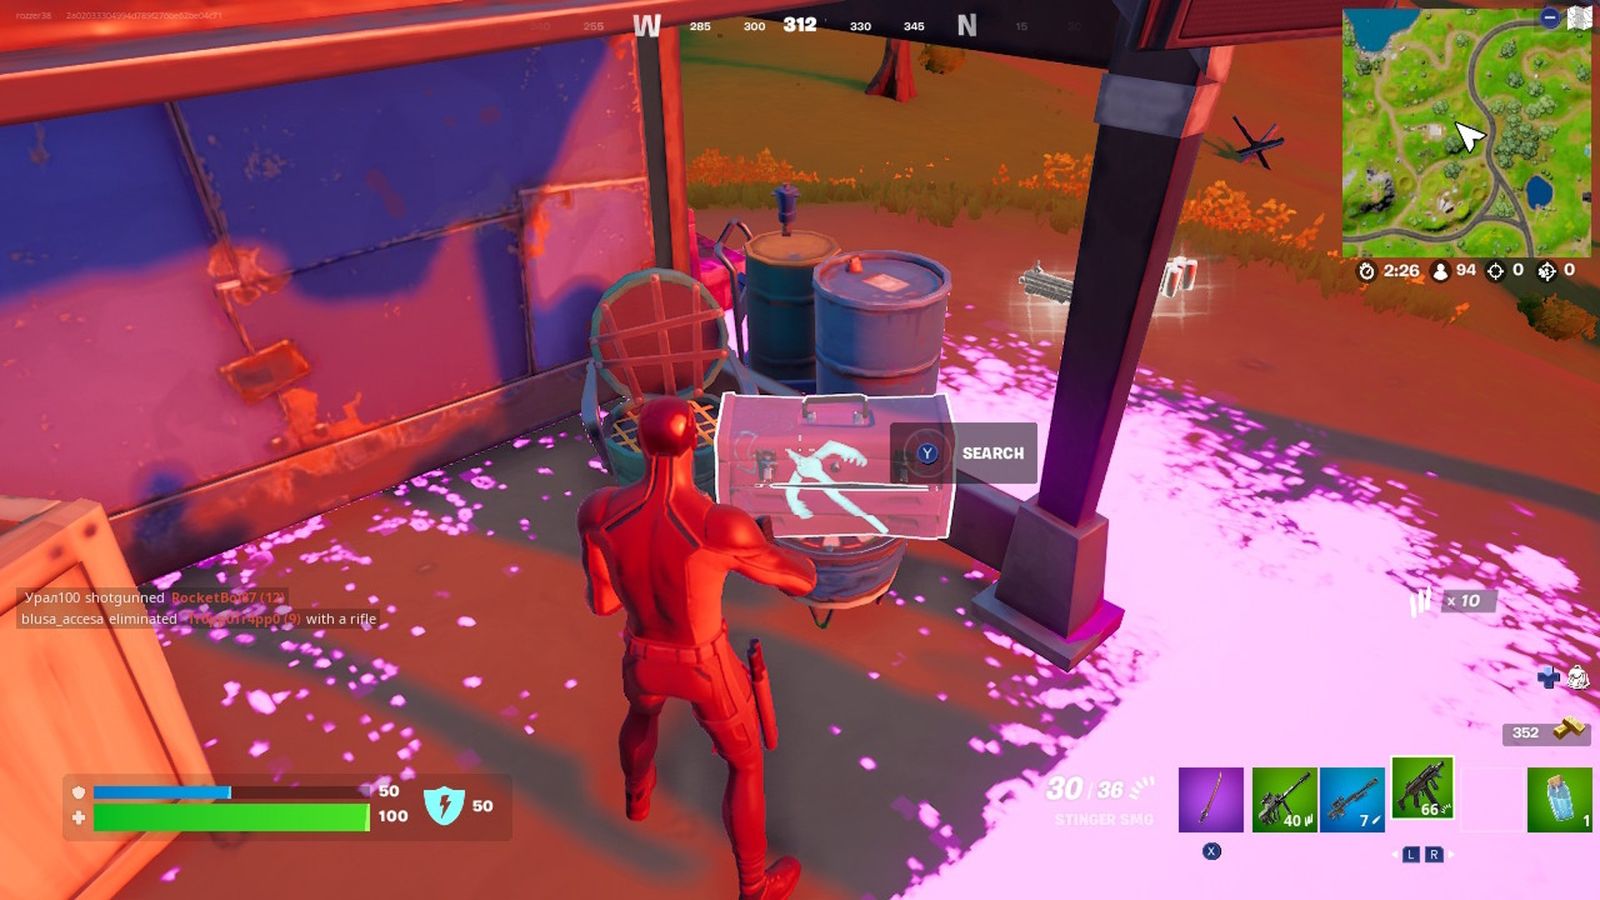 Image of the player opening a toolbox in Fortnite.